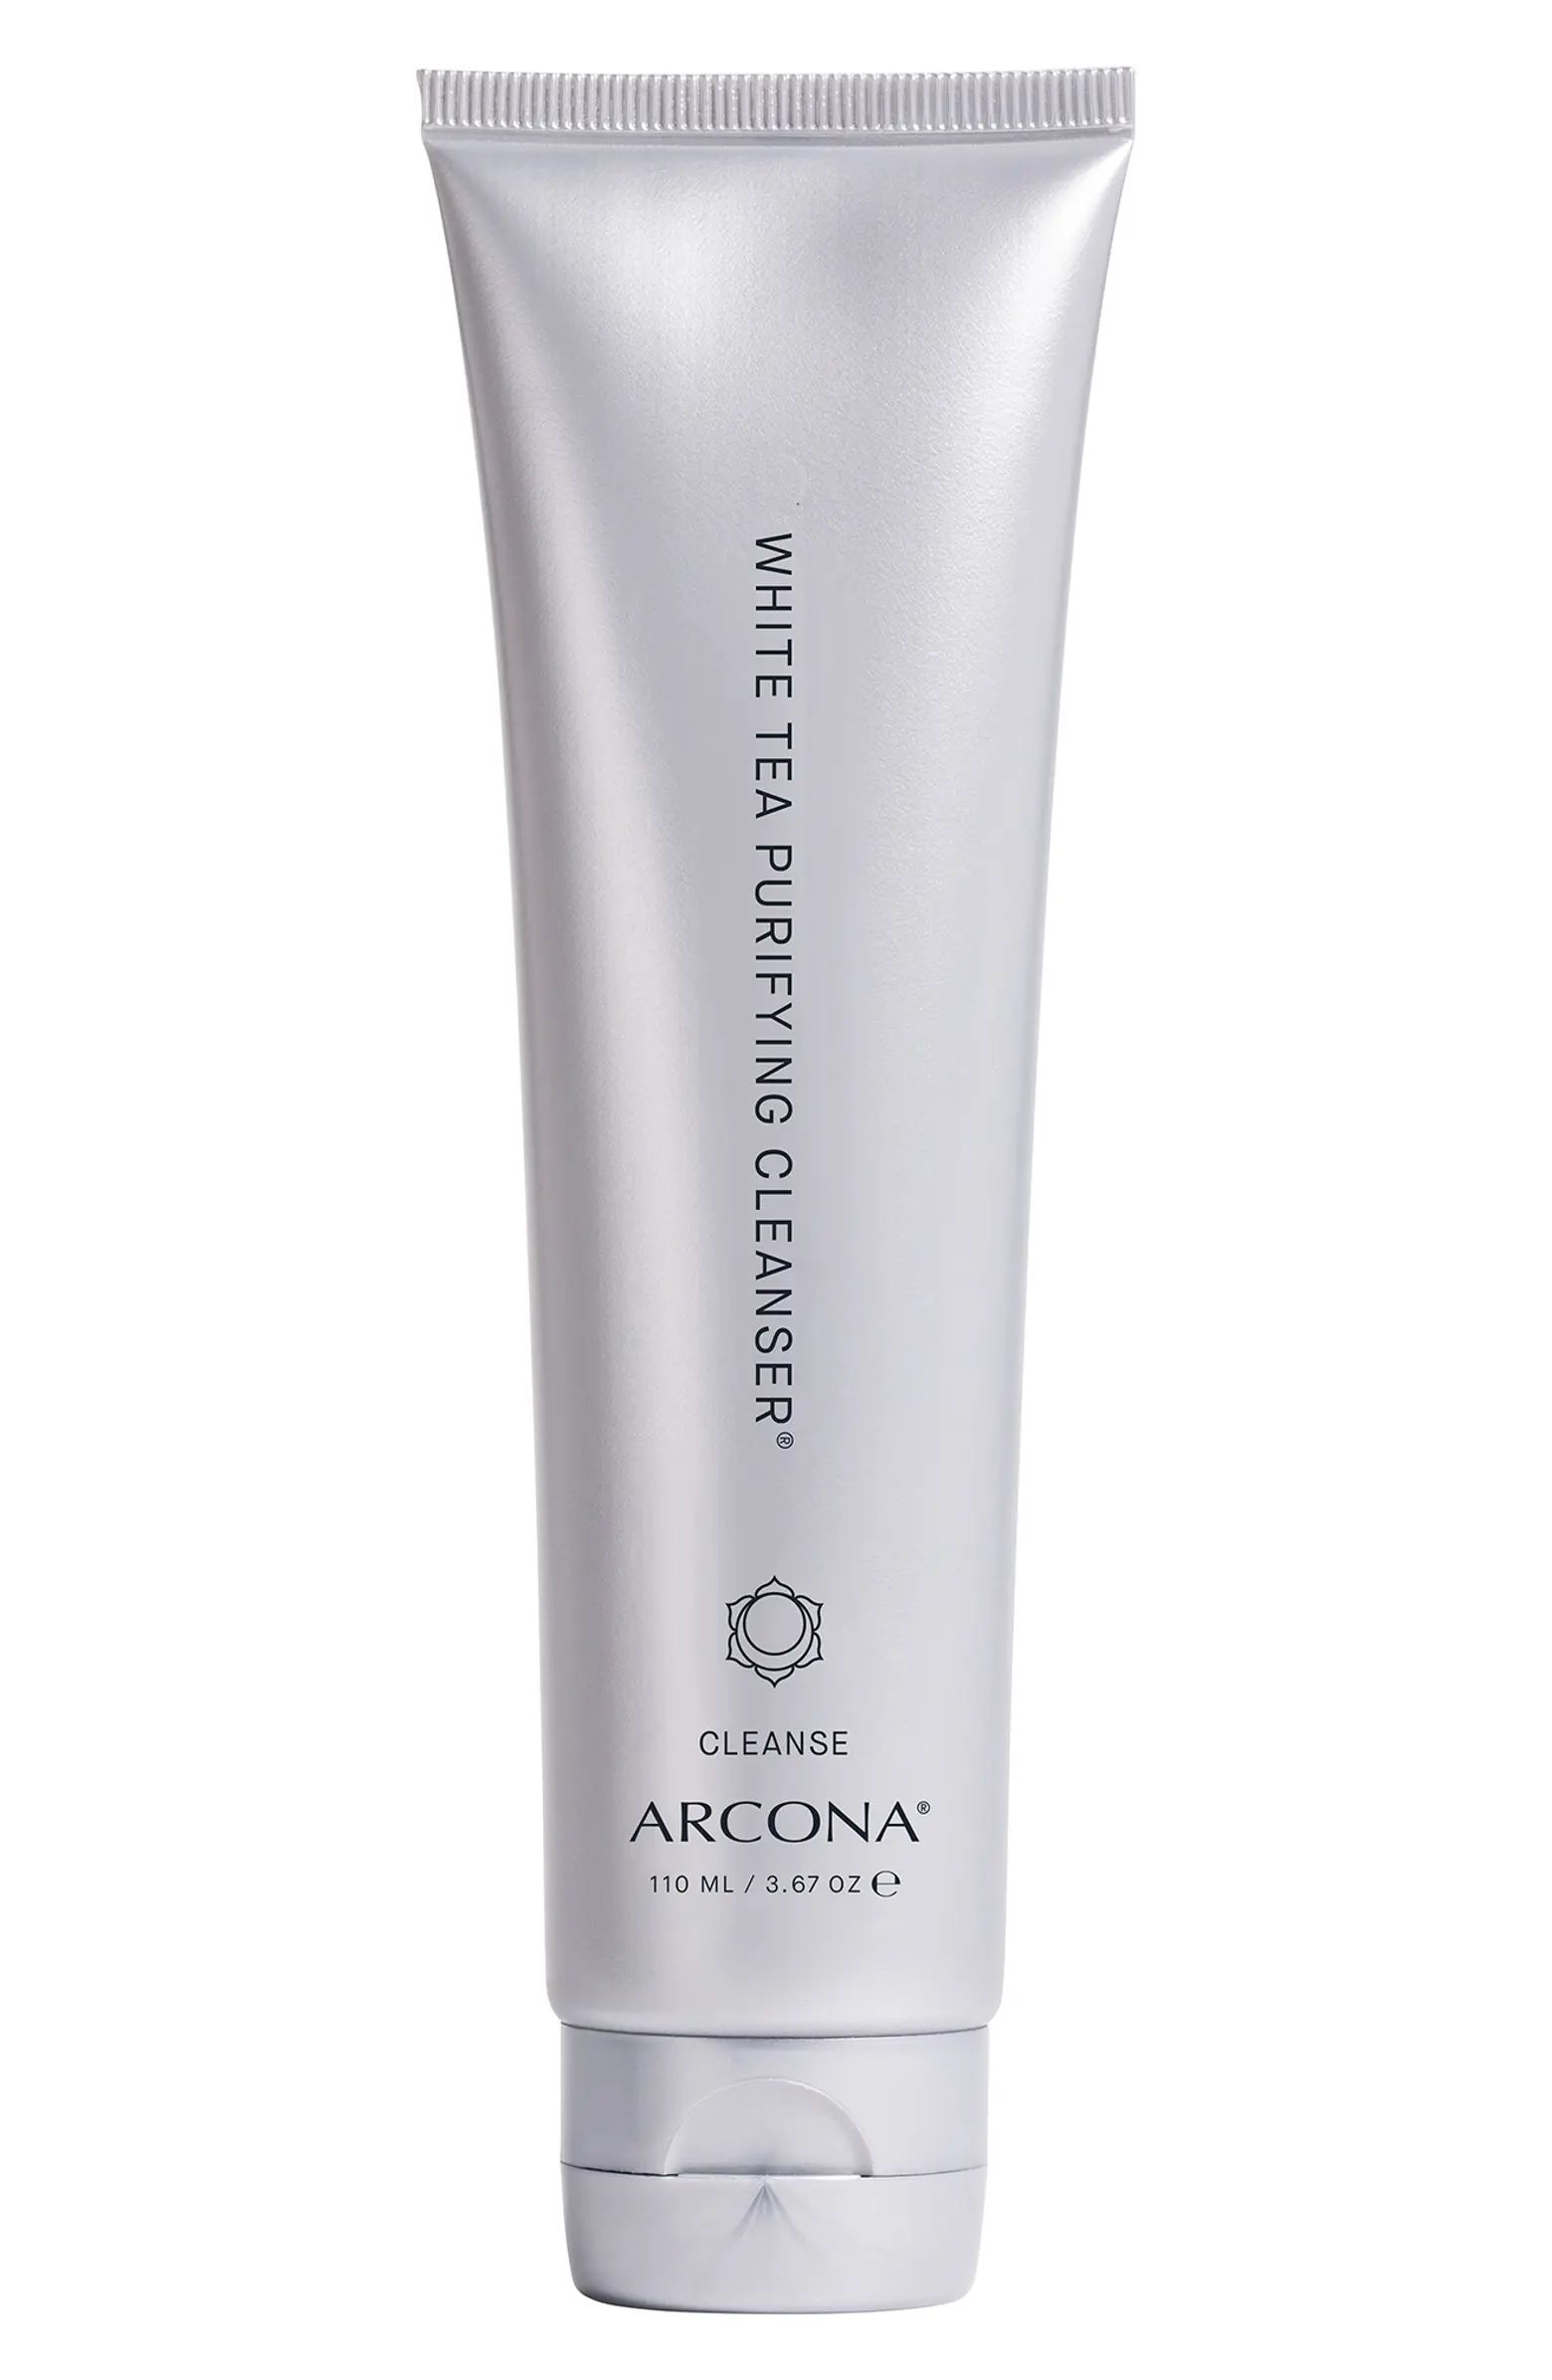 ARCONA White Tea Purifying Cleanser Gel Facial Cleanser | Nordstrom | Nordstrom